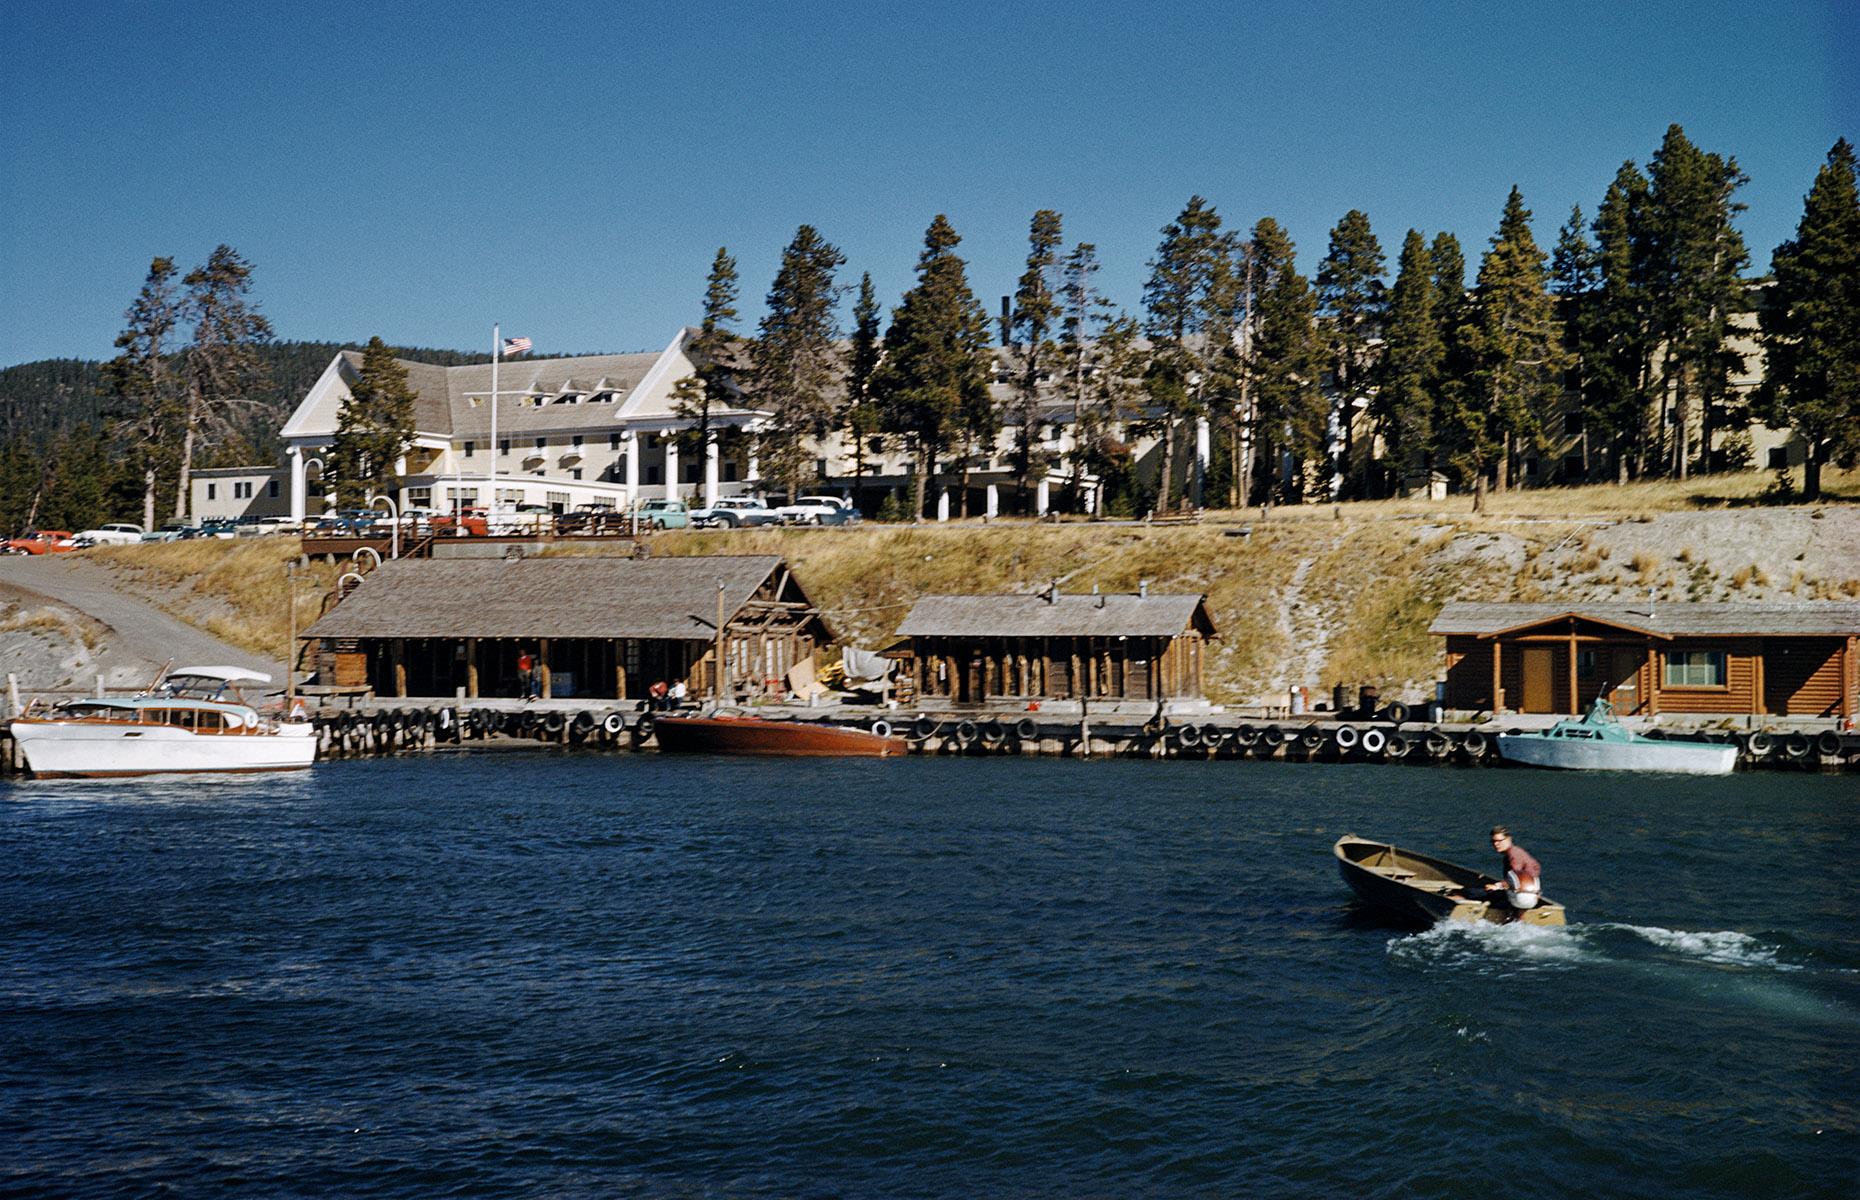 <p>By the 1960s, accommodation options in the park were varied, and a favored spot was <a href="https://www.yellowstonenationalparklodges.com/lodgings/cabin/lake-yellowstone-hotel-cabins/">Lake Yellowstone Hotel</a> (pictured). It's one of the oldest national park hotels in the USA, opened back in 1891, and predating the formation of the National Park Service itself. It's captured here in 1965, arranged along the edge of the water, which is busy with recreational boats. Today, it's a National Historic Landmark with a slew of deluxe lake-view rooms. </p>